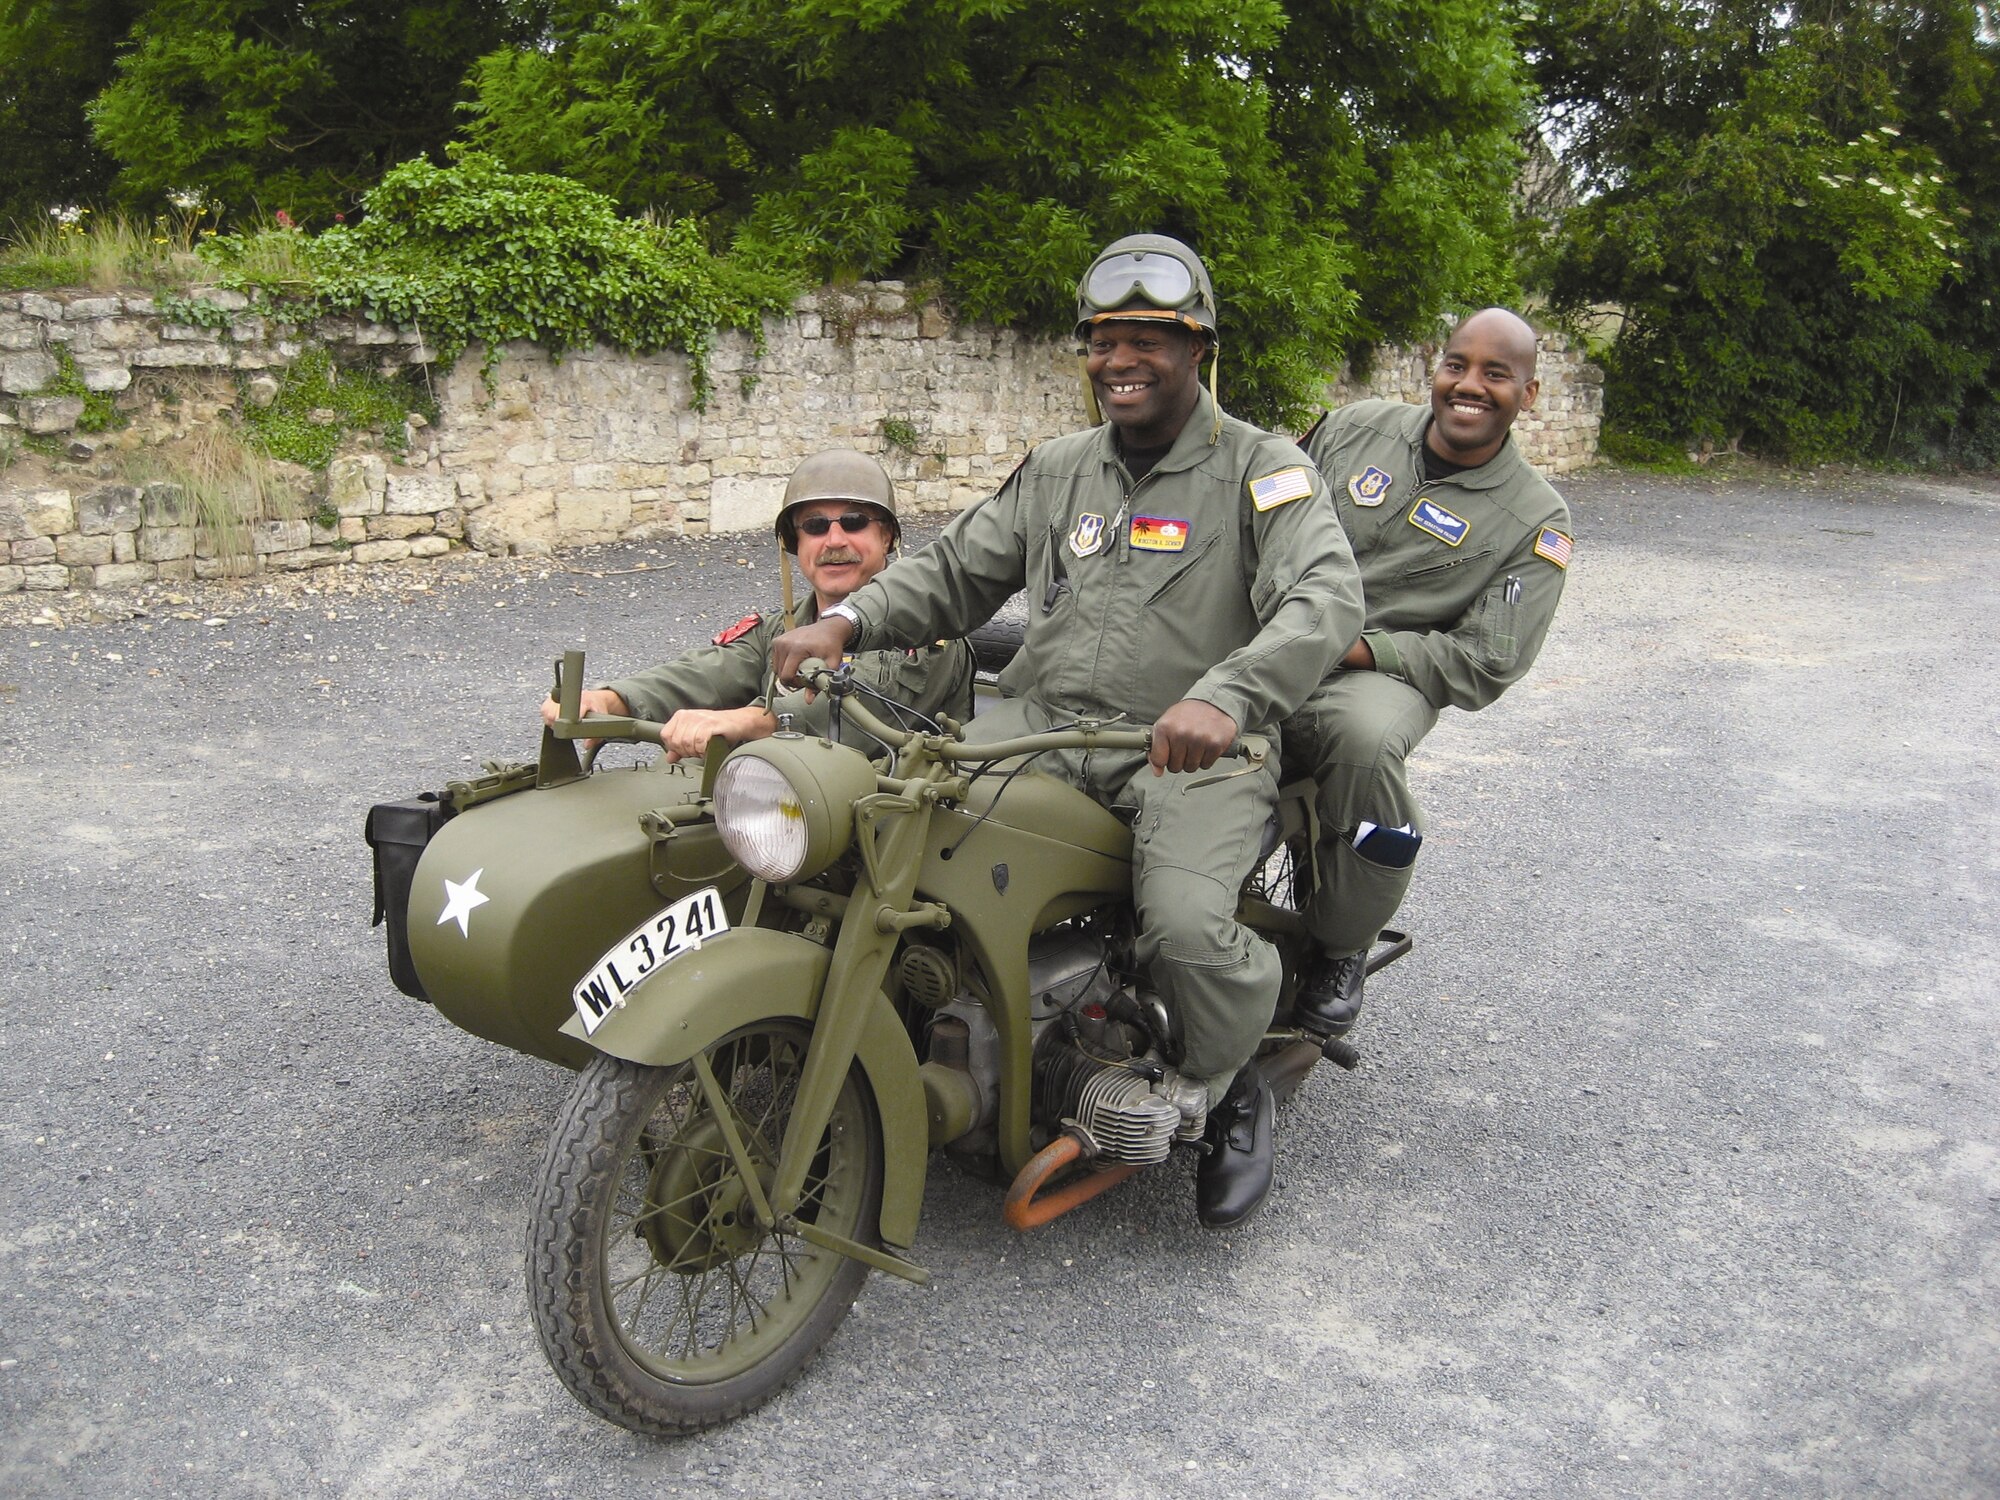 Lt. Col. Keith Guillotte (from left) pilot, Staff Sgt. Winston Demmin, crew chief, and Master Sgt. Sebastian Faison, loadmaster, all from the 729th Airlift Squadron, get into character as they have a seat on a period motorcycle. This was day one of their trip to Normandy, France this past June to support the flyovers of the Picauville American Memorial and the Normandy-American Cemetery. The crew said they were overwhelmed by the amazing number of French citizens who dressed like American Soldiers from the D-Day period. The locals had also, over the many years since the war, refurbished an abundant amount of reclaimed U.S. military vehicles – jeeps, tanks, motorcycles, etc. (U.S. Air Force photo)